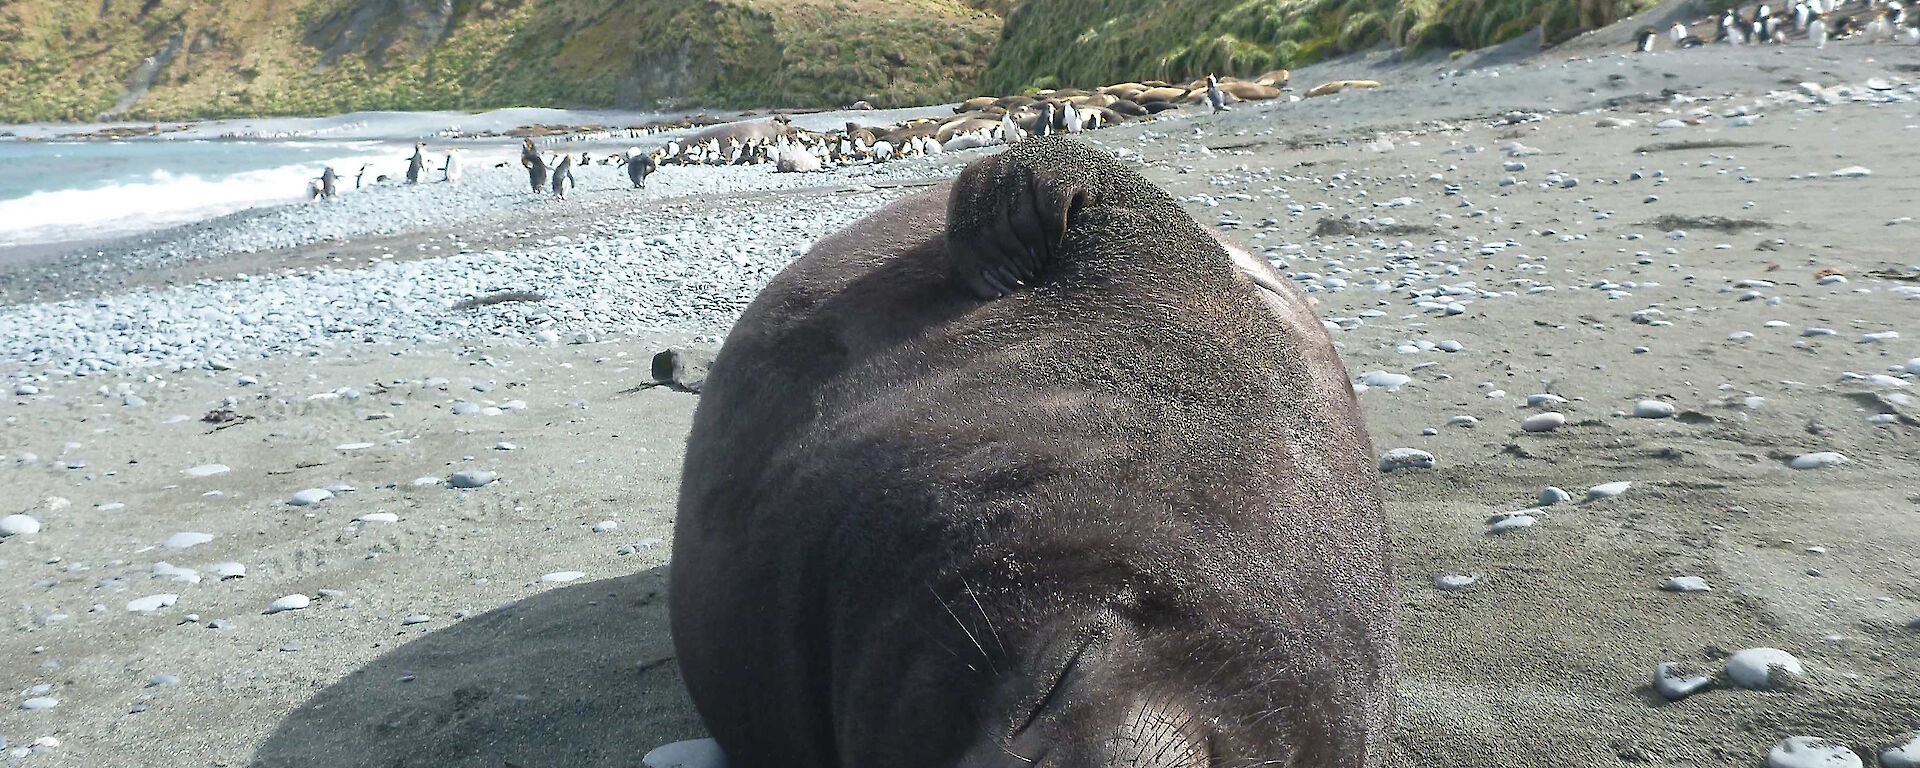 A sleepy weaner having a scratch while lying on the beach.